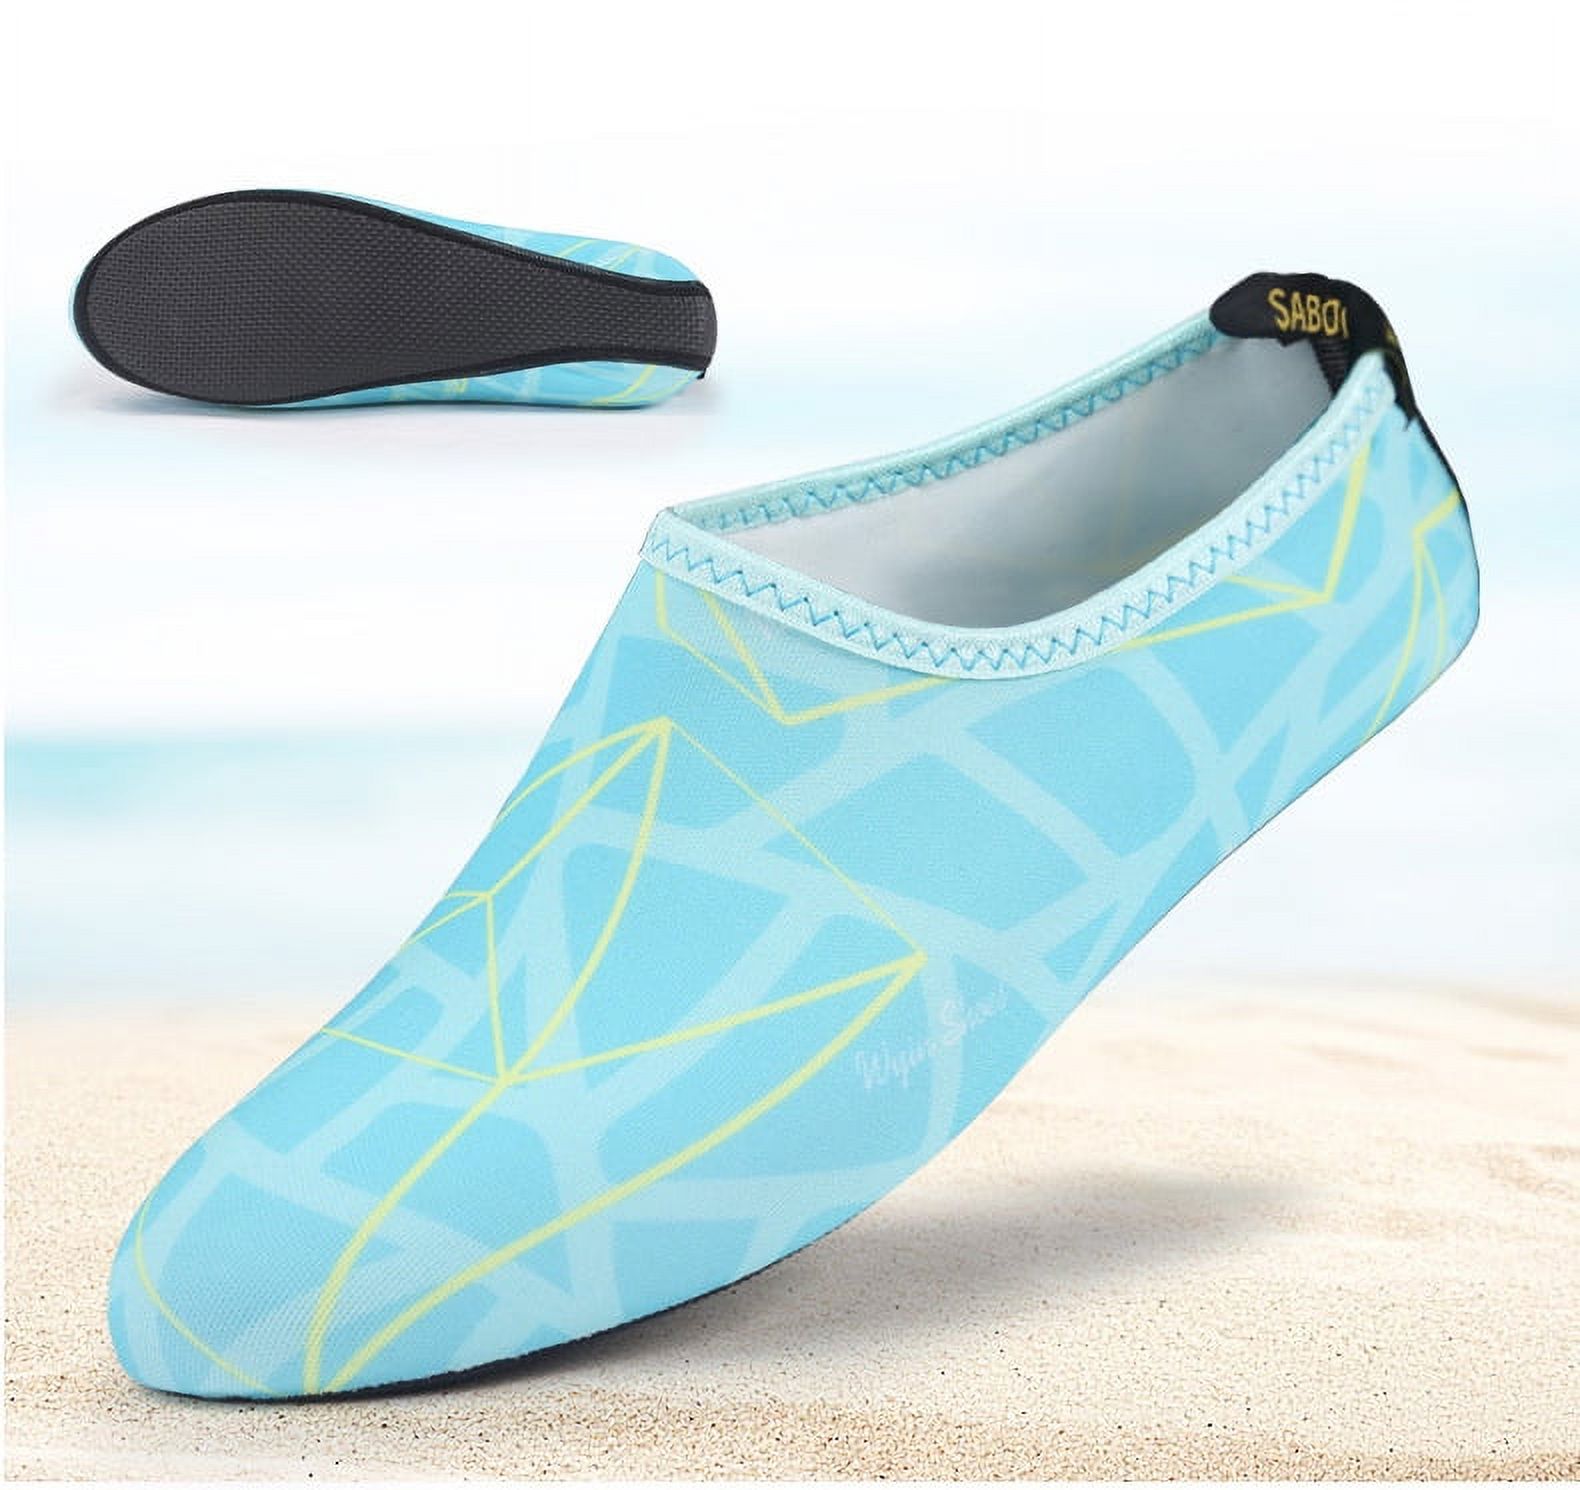 Barefoot Water Skin Shoes, Epicgadget(TM) Quick-Dry Flexible Water Skin Shoes Aqua Socks for Beach, Swim, Diving, Snorkeling, Running, Surfing and Yoga Exercise (Blue/Yellow, XL. US 9-10 EUR 40-41) - image 1 of 2